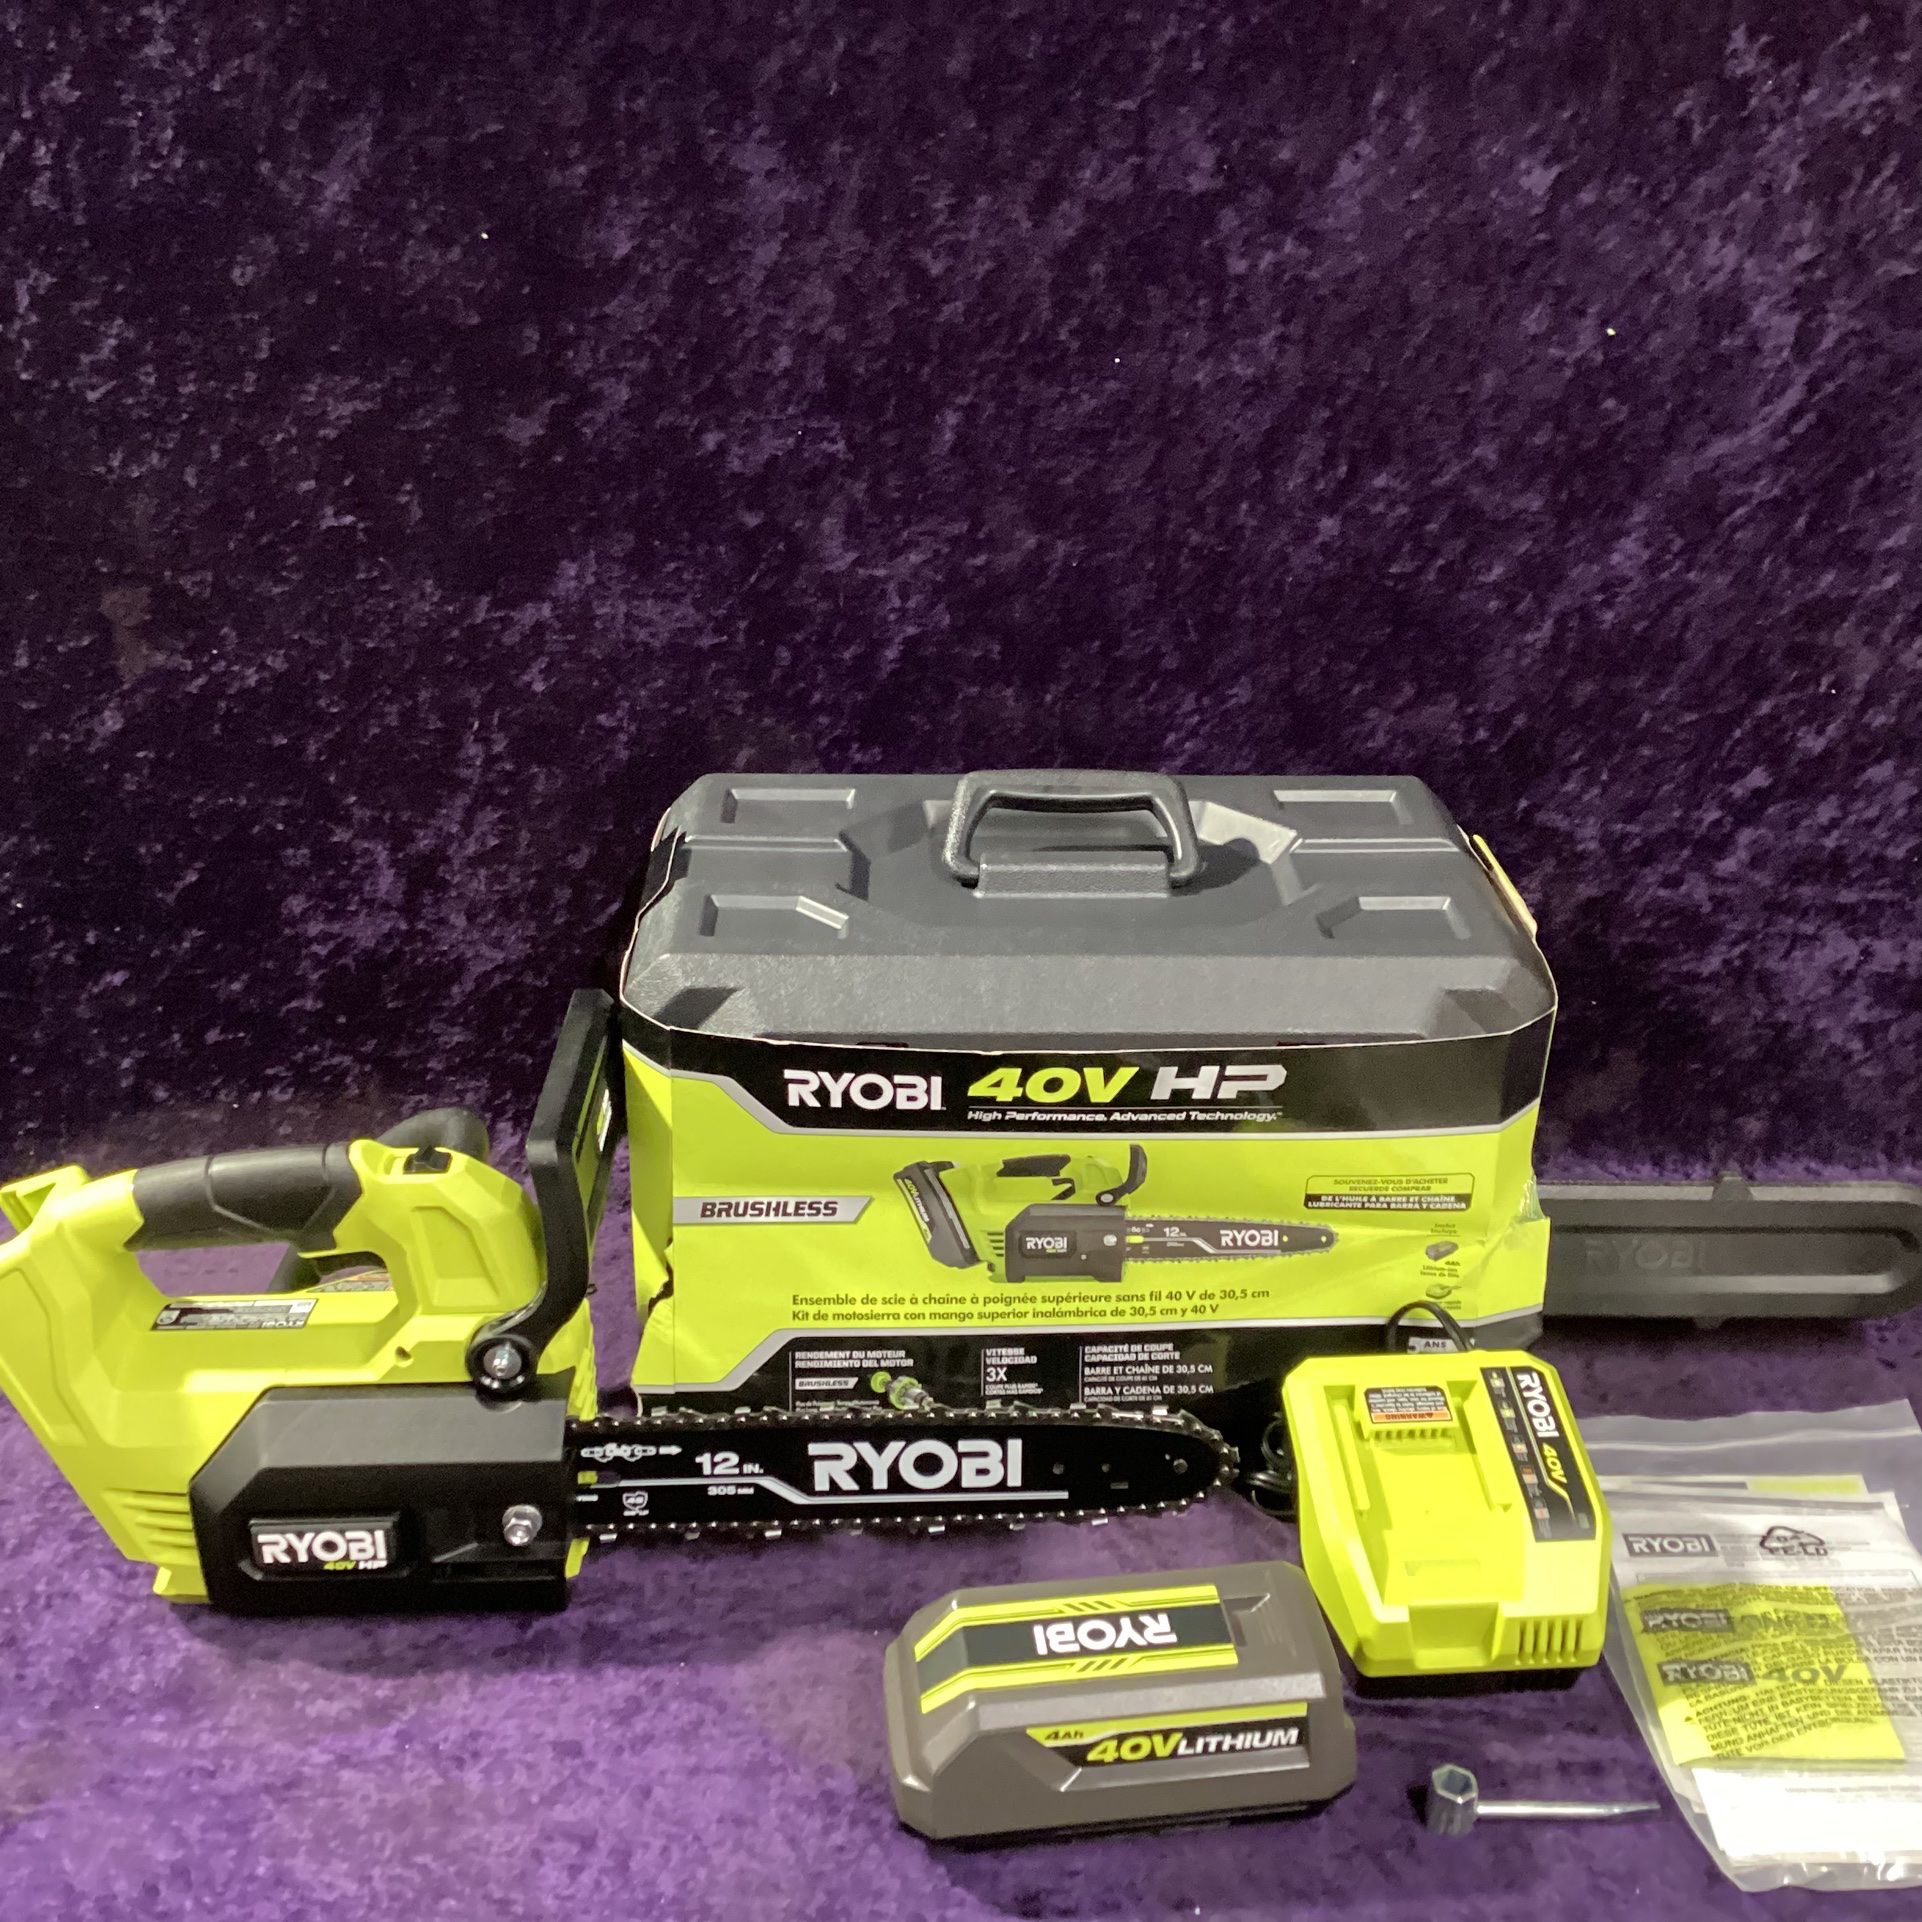 🛠🧰RYOBI 40V HP Brushless 12” Top Handle Battery Chainsaw w/4.0 Battery & Charger NEW!-$180!🧰🛠